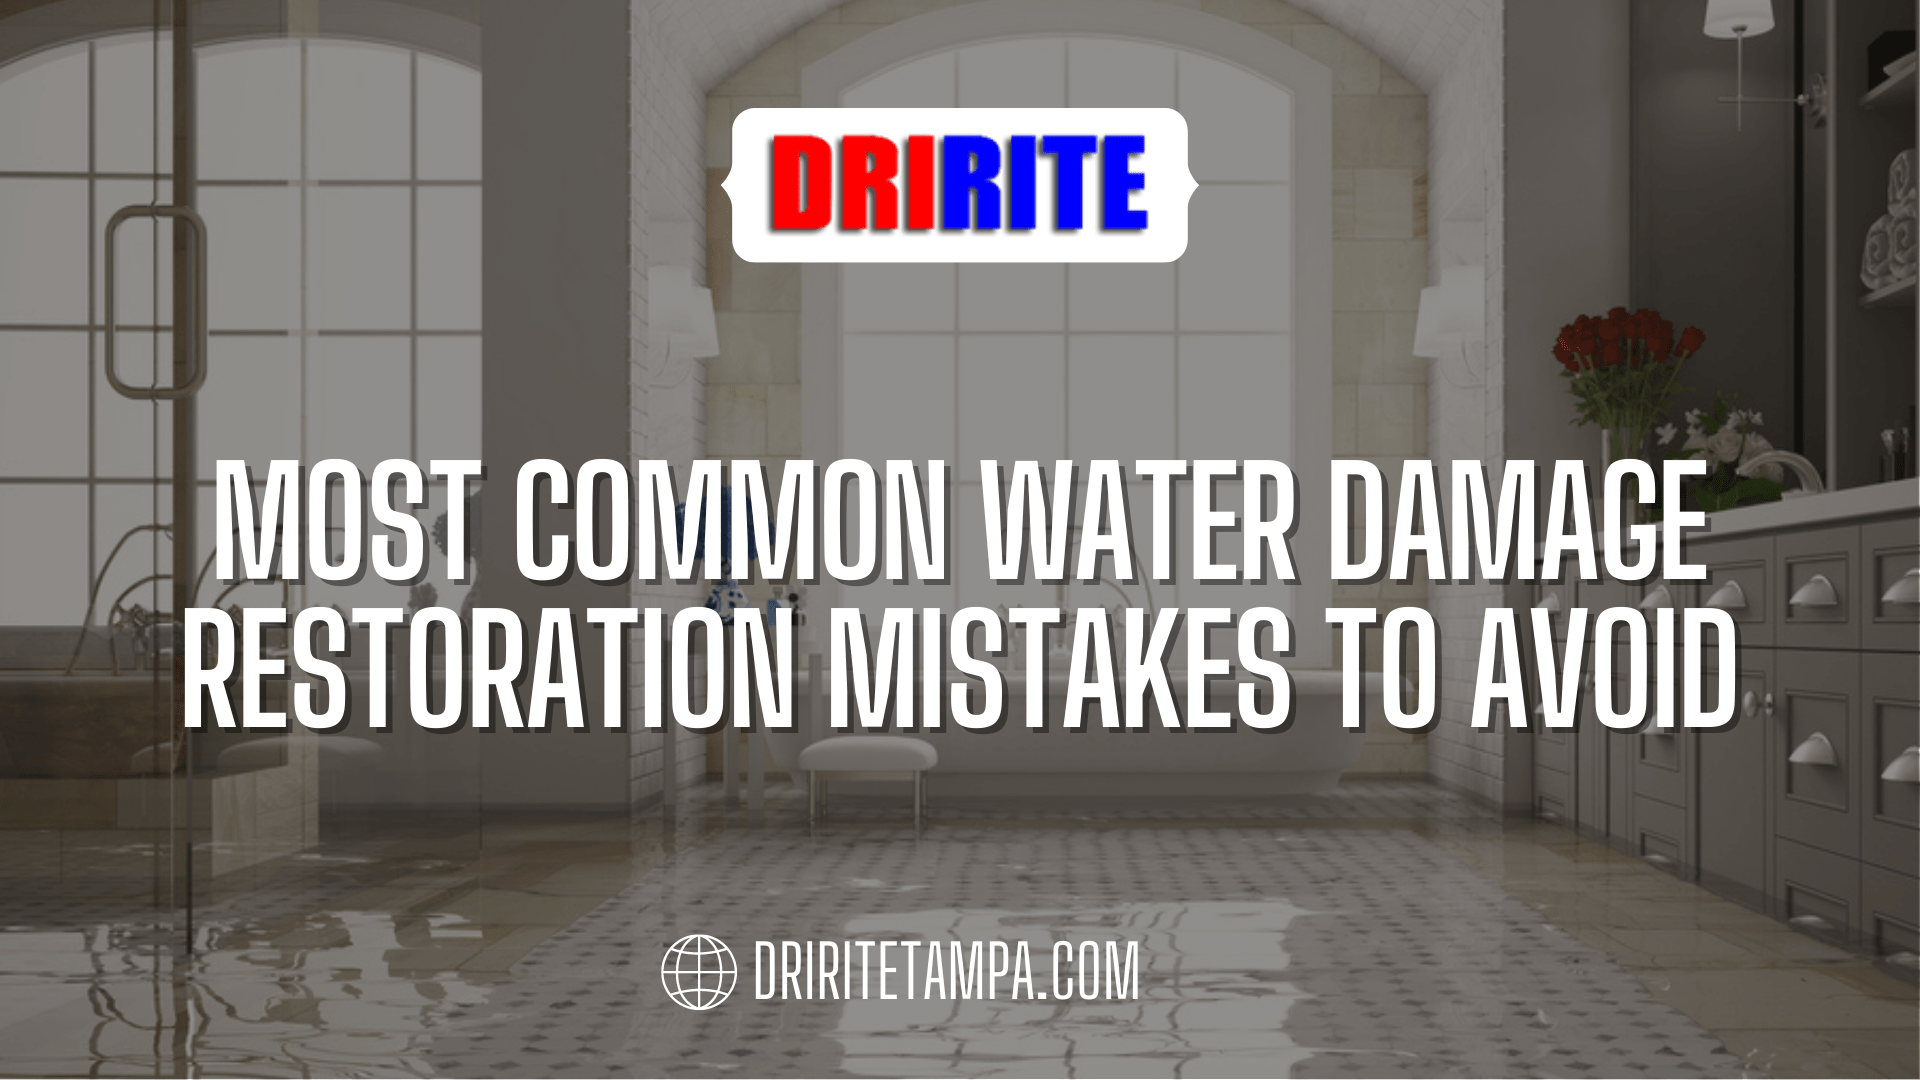 9 Most Common Water Damage Restoration Mistakes to Avoid